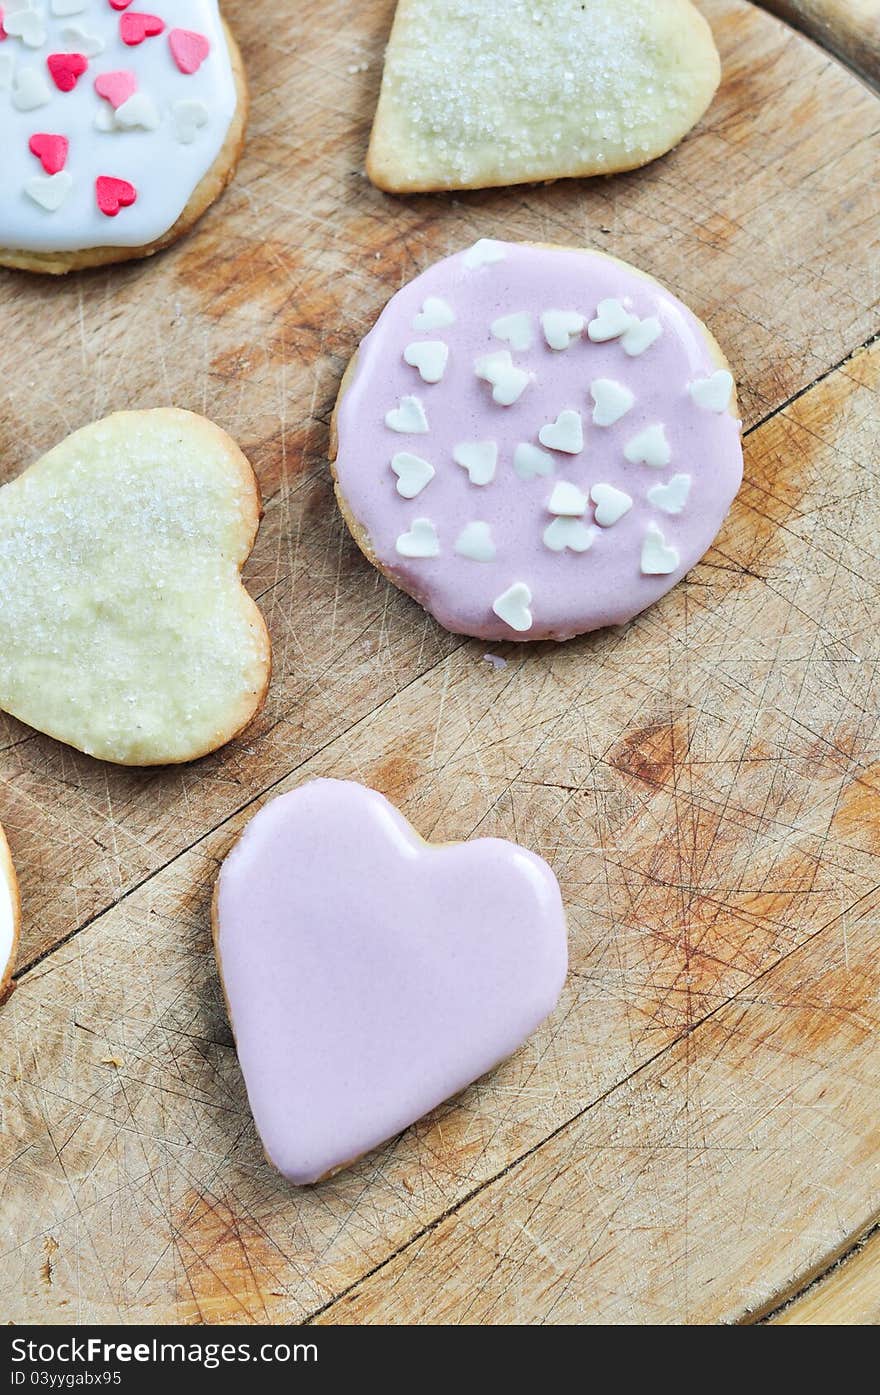 Heart-shaped biscuits on a wooden board.